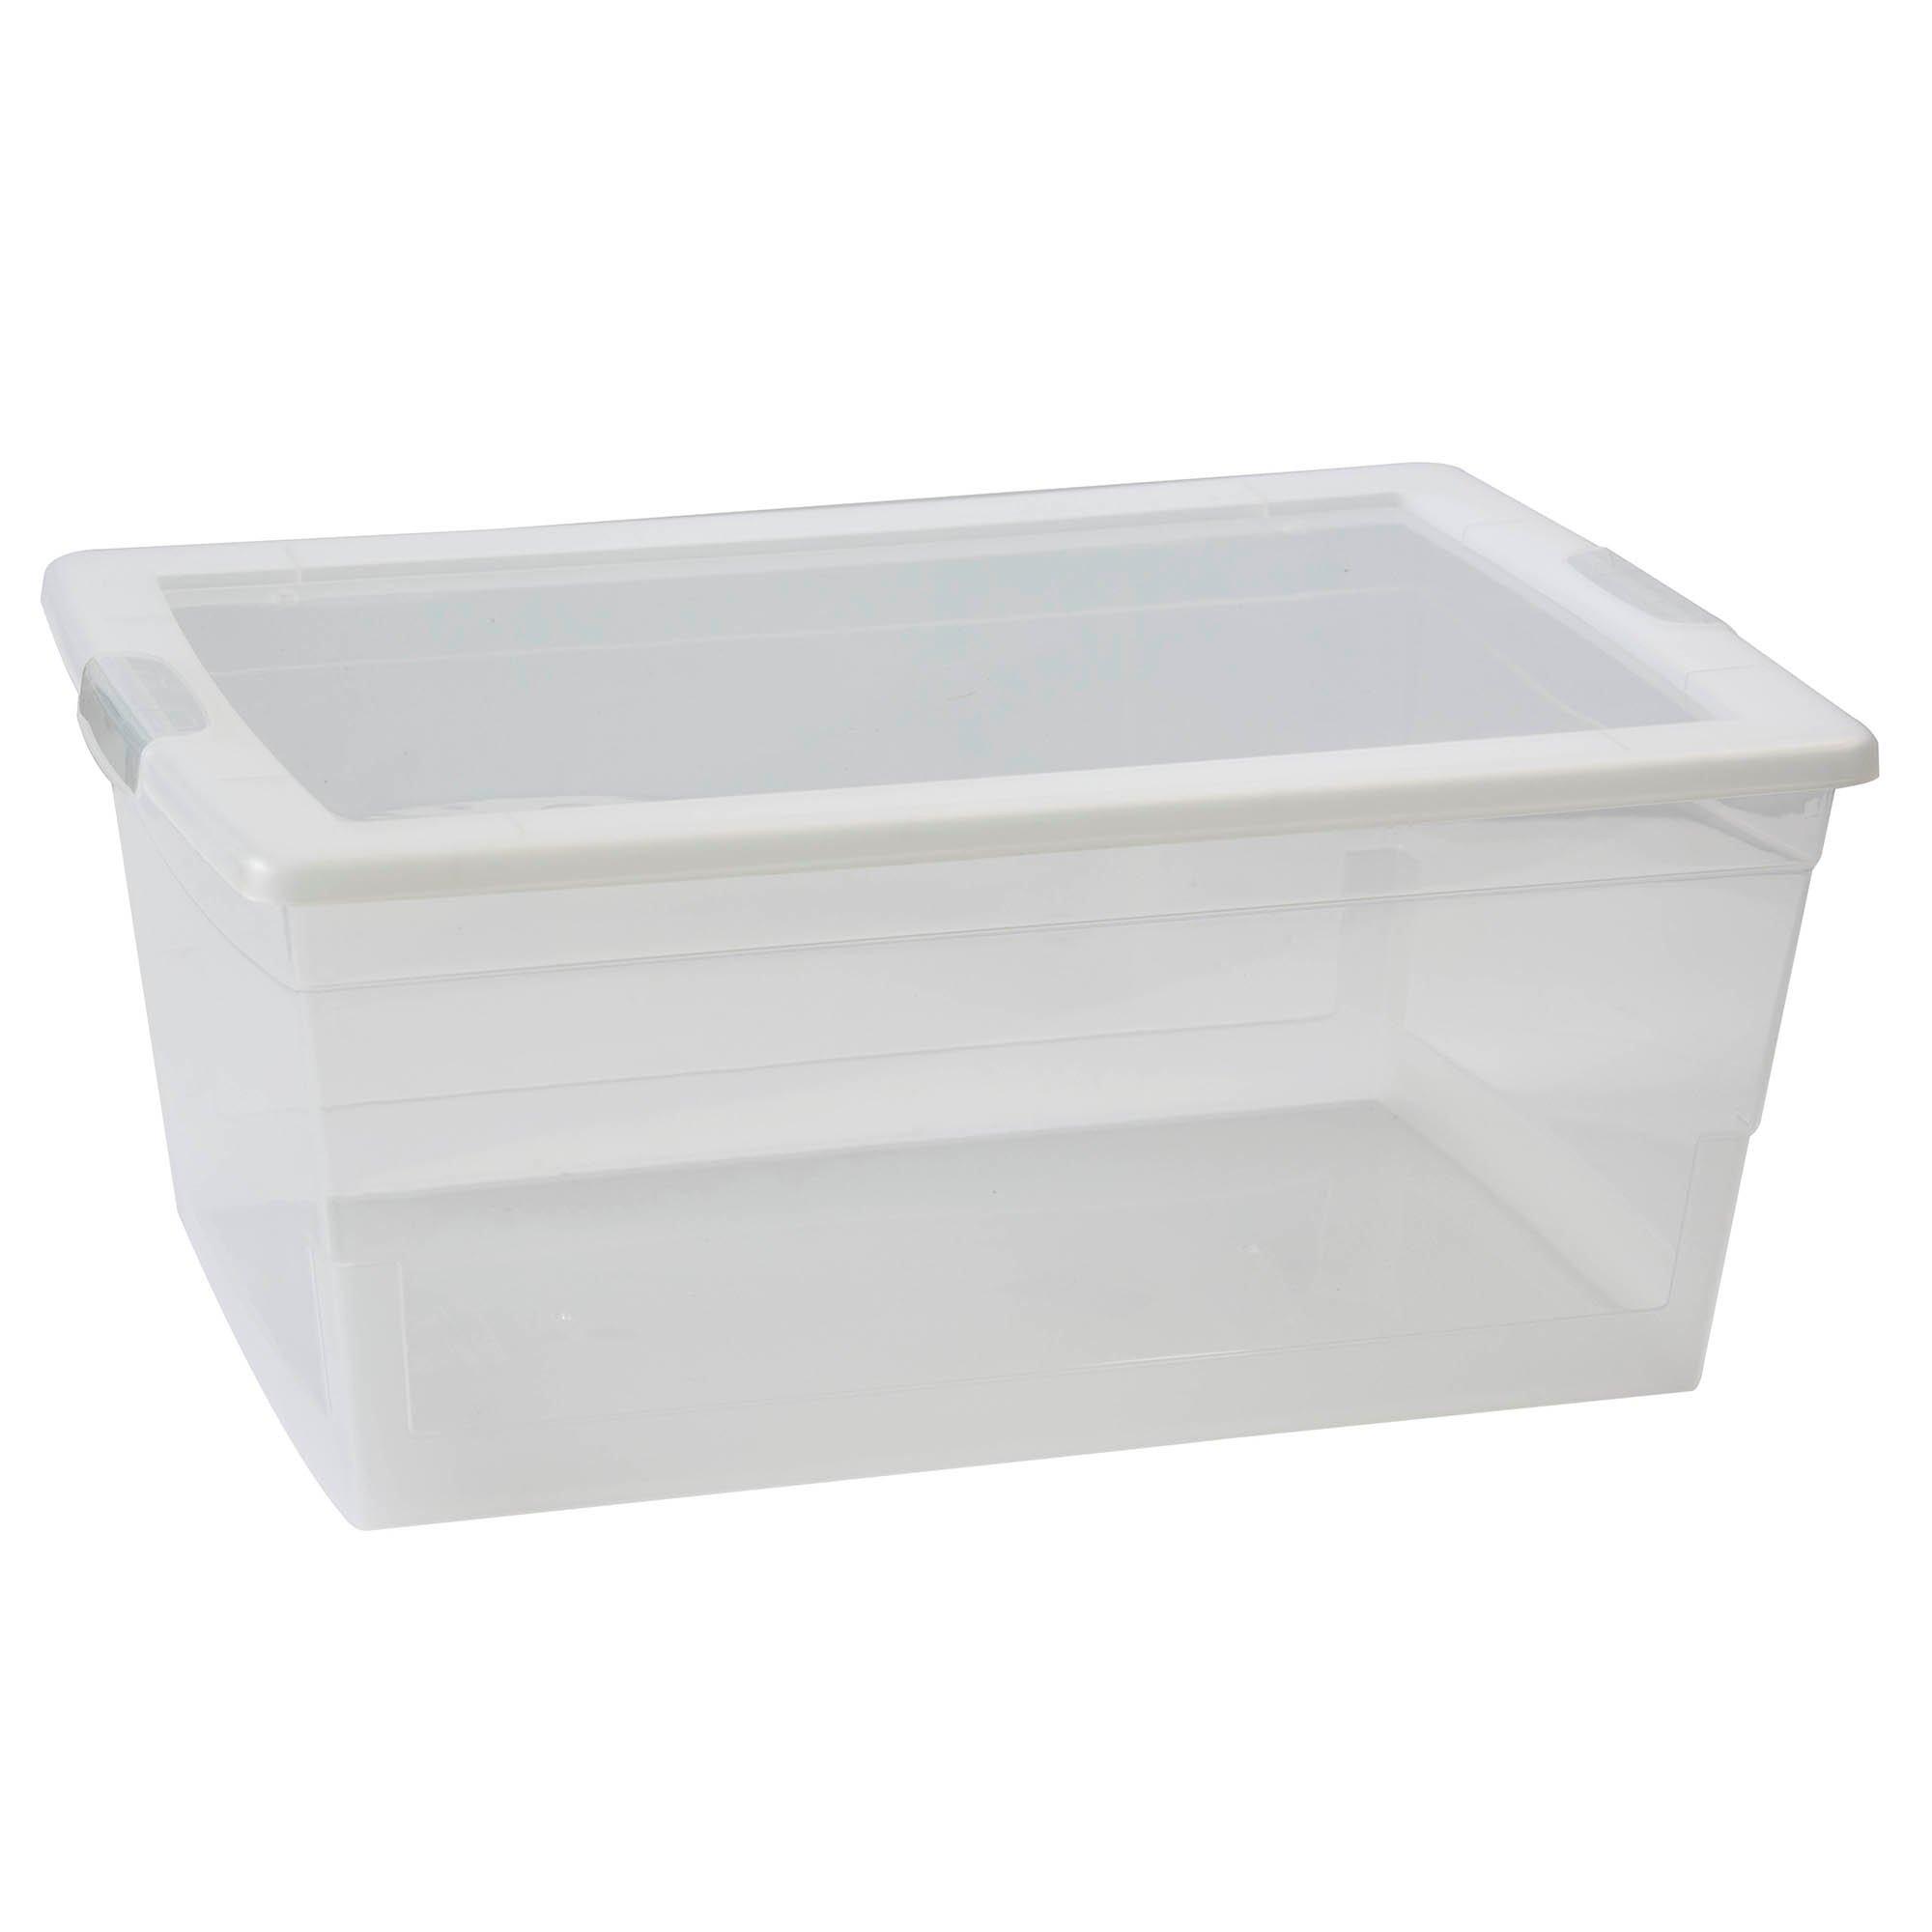 Kis Omni Box 15.9 Qt Storage Container with Lid, Coral